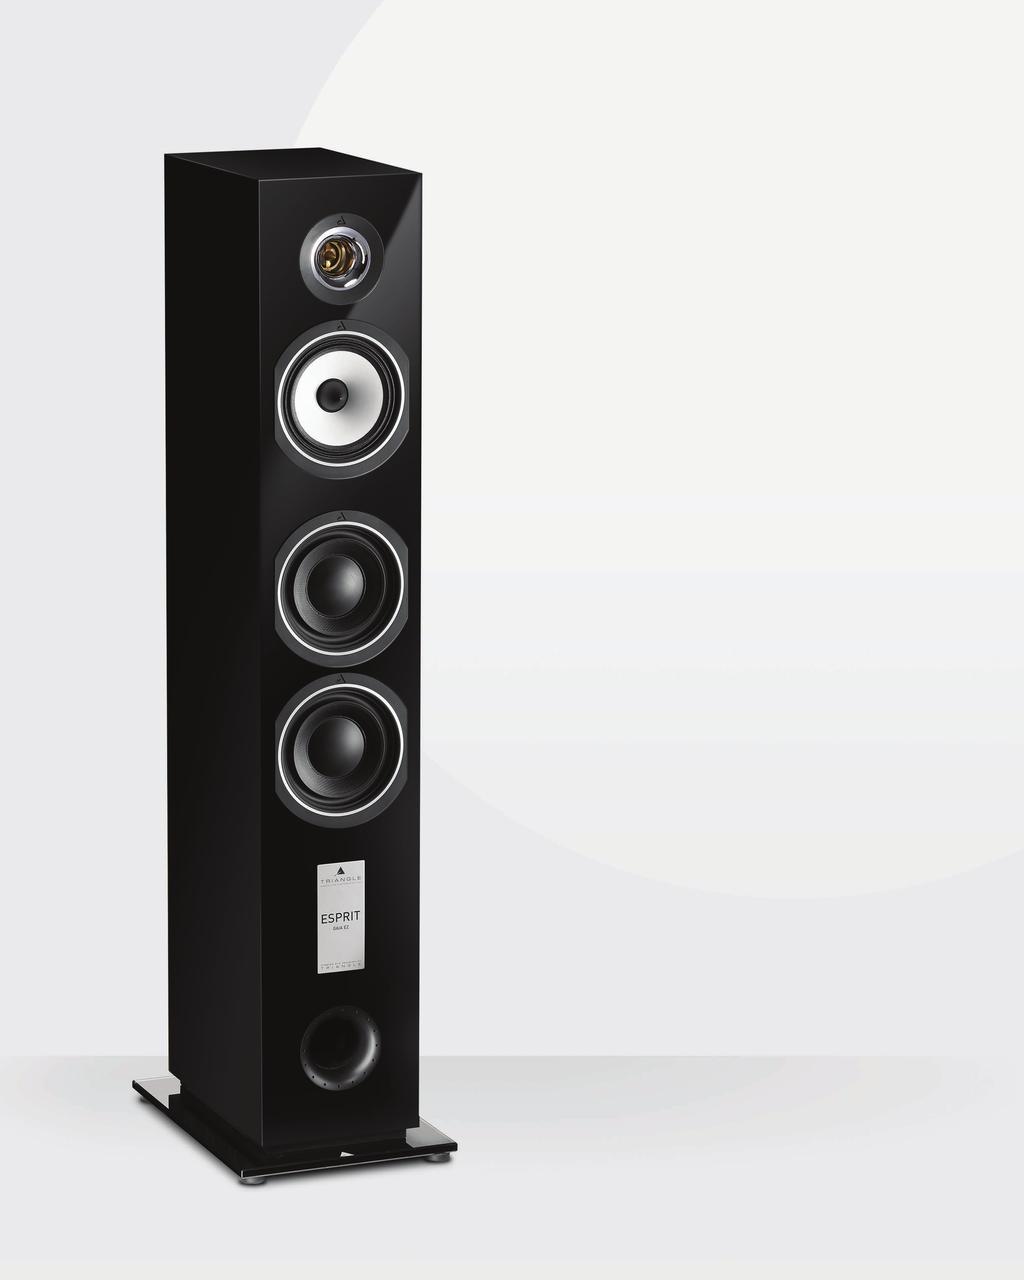 NOBLE MATERIALS As with a musical instrument, the quality of each part has a decisive impact on the speakers